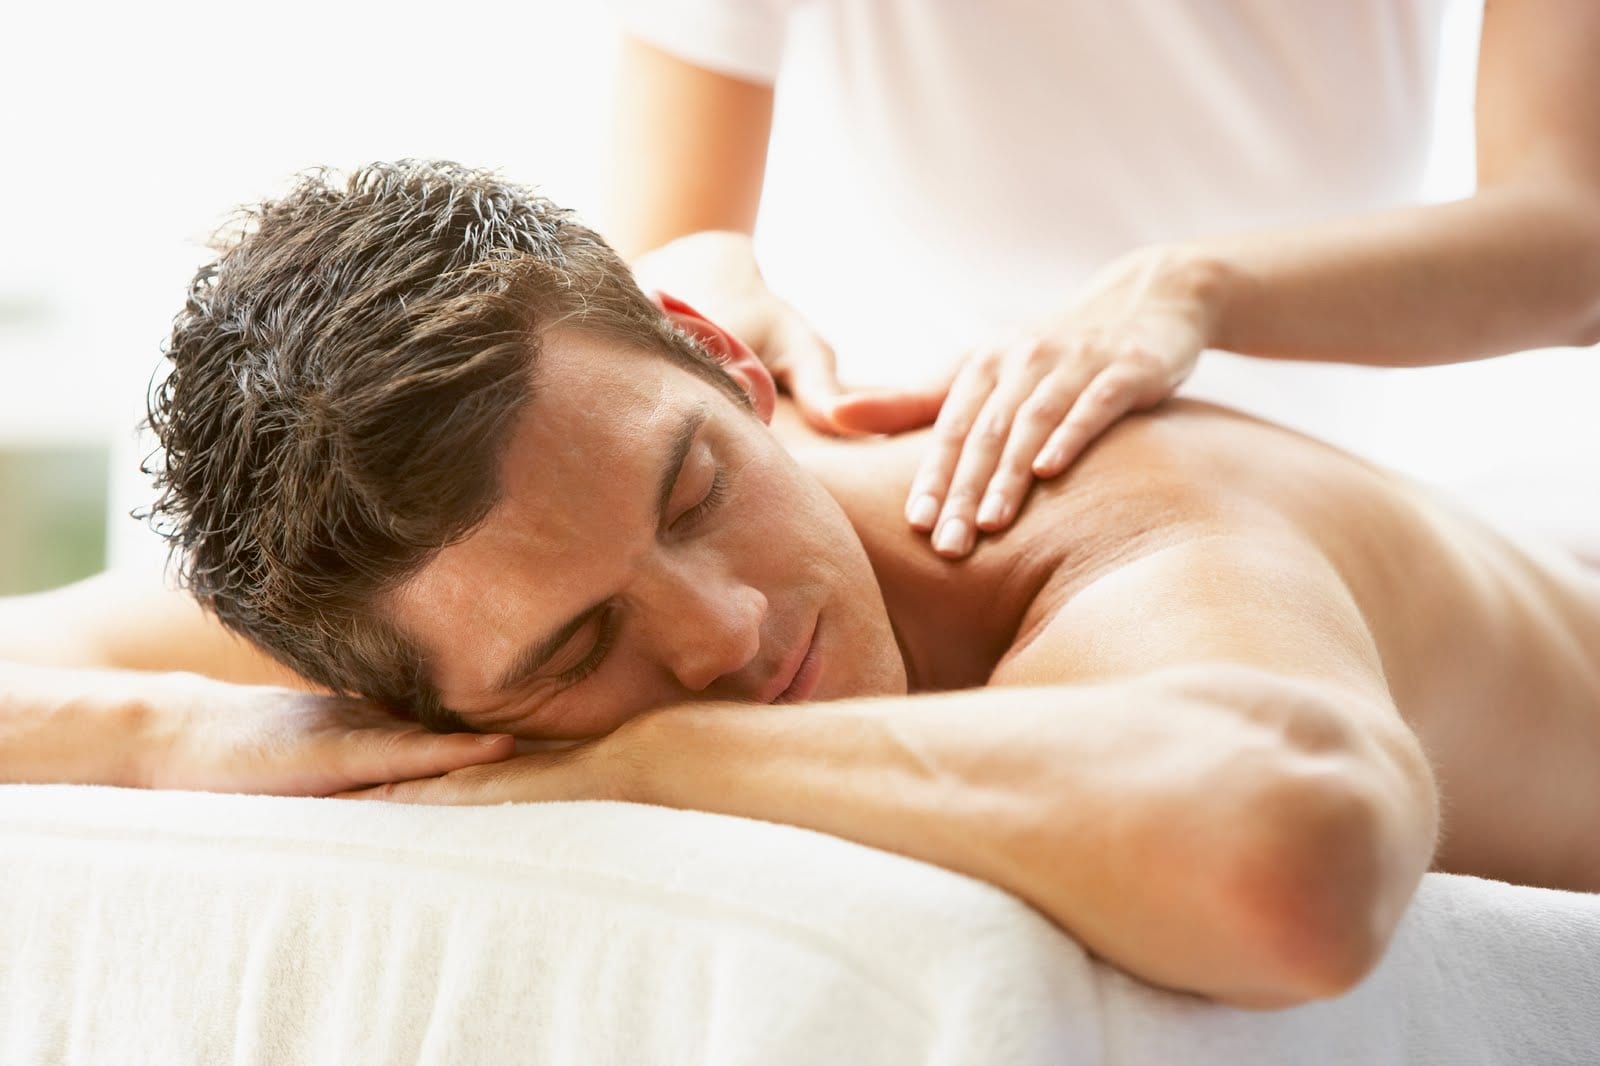 Image of a man during massage session